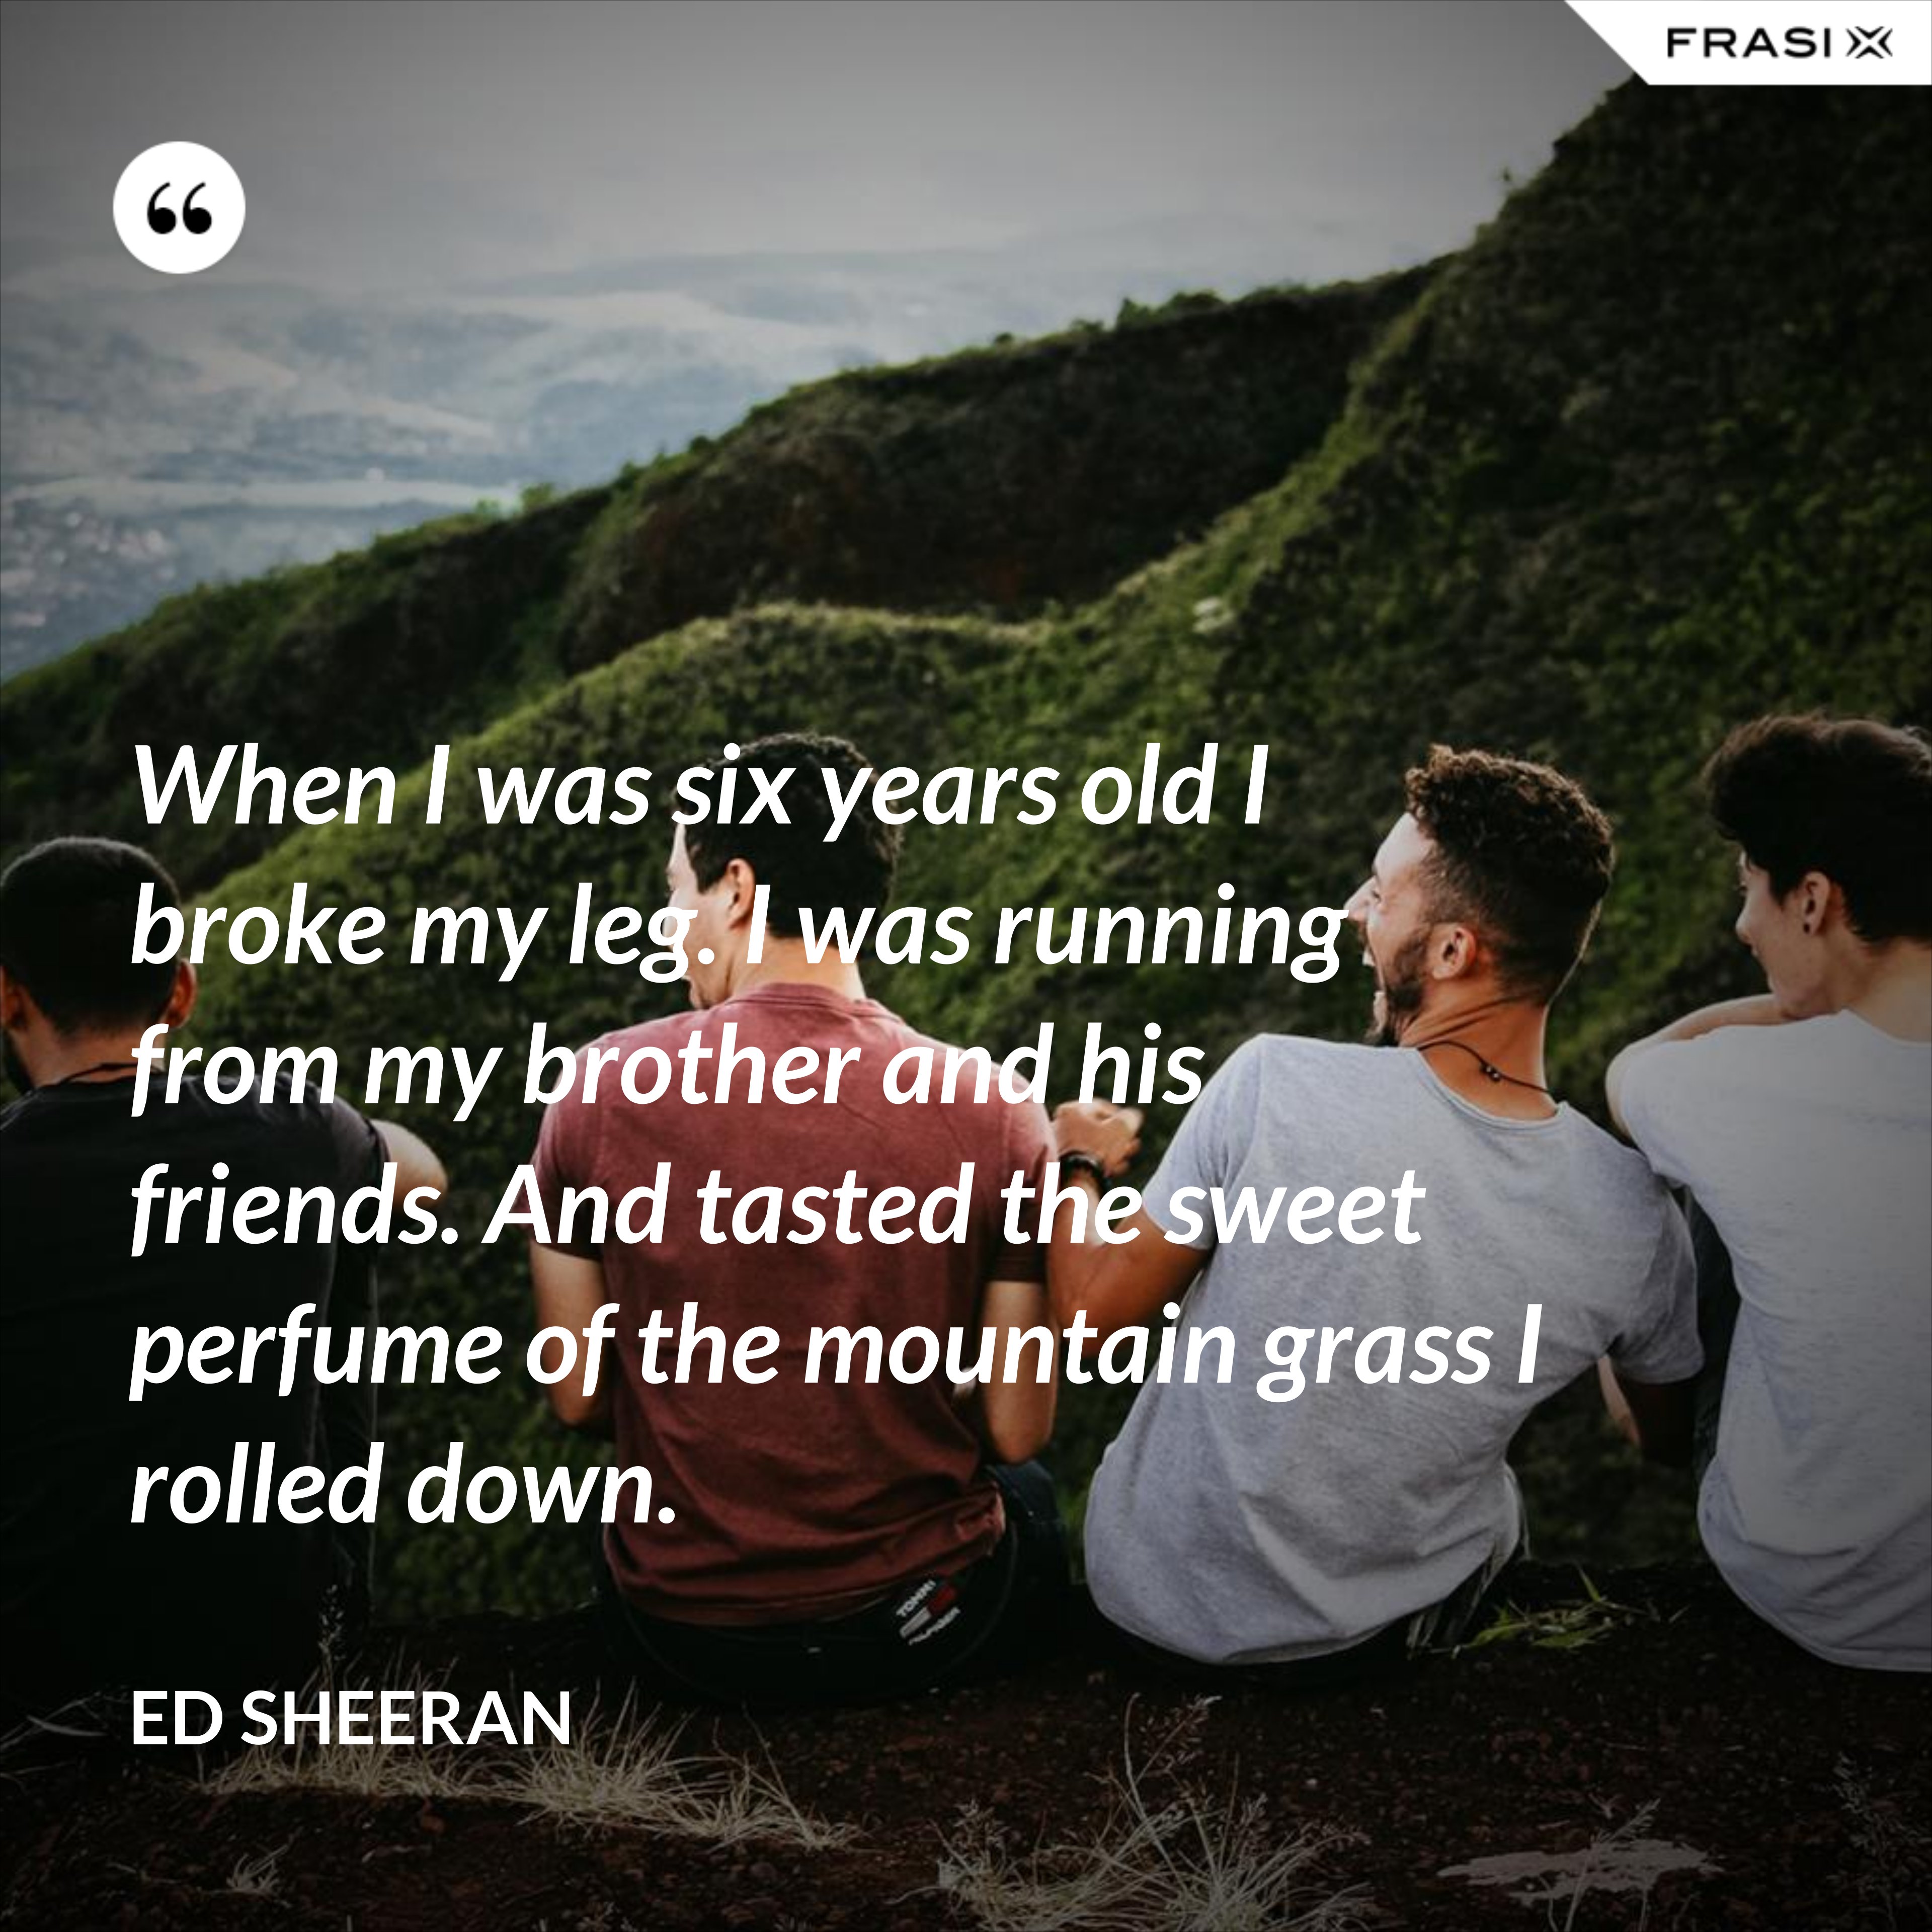 When I was six years old I broke my leg. I was running from my brother and his friends. And tasted the sweet perfume of the mountain grass I rolled down. - Ed Sheeran